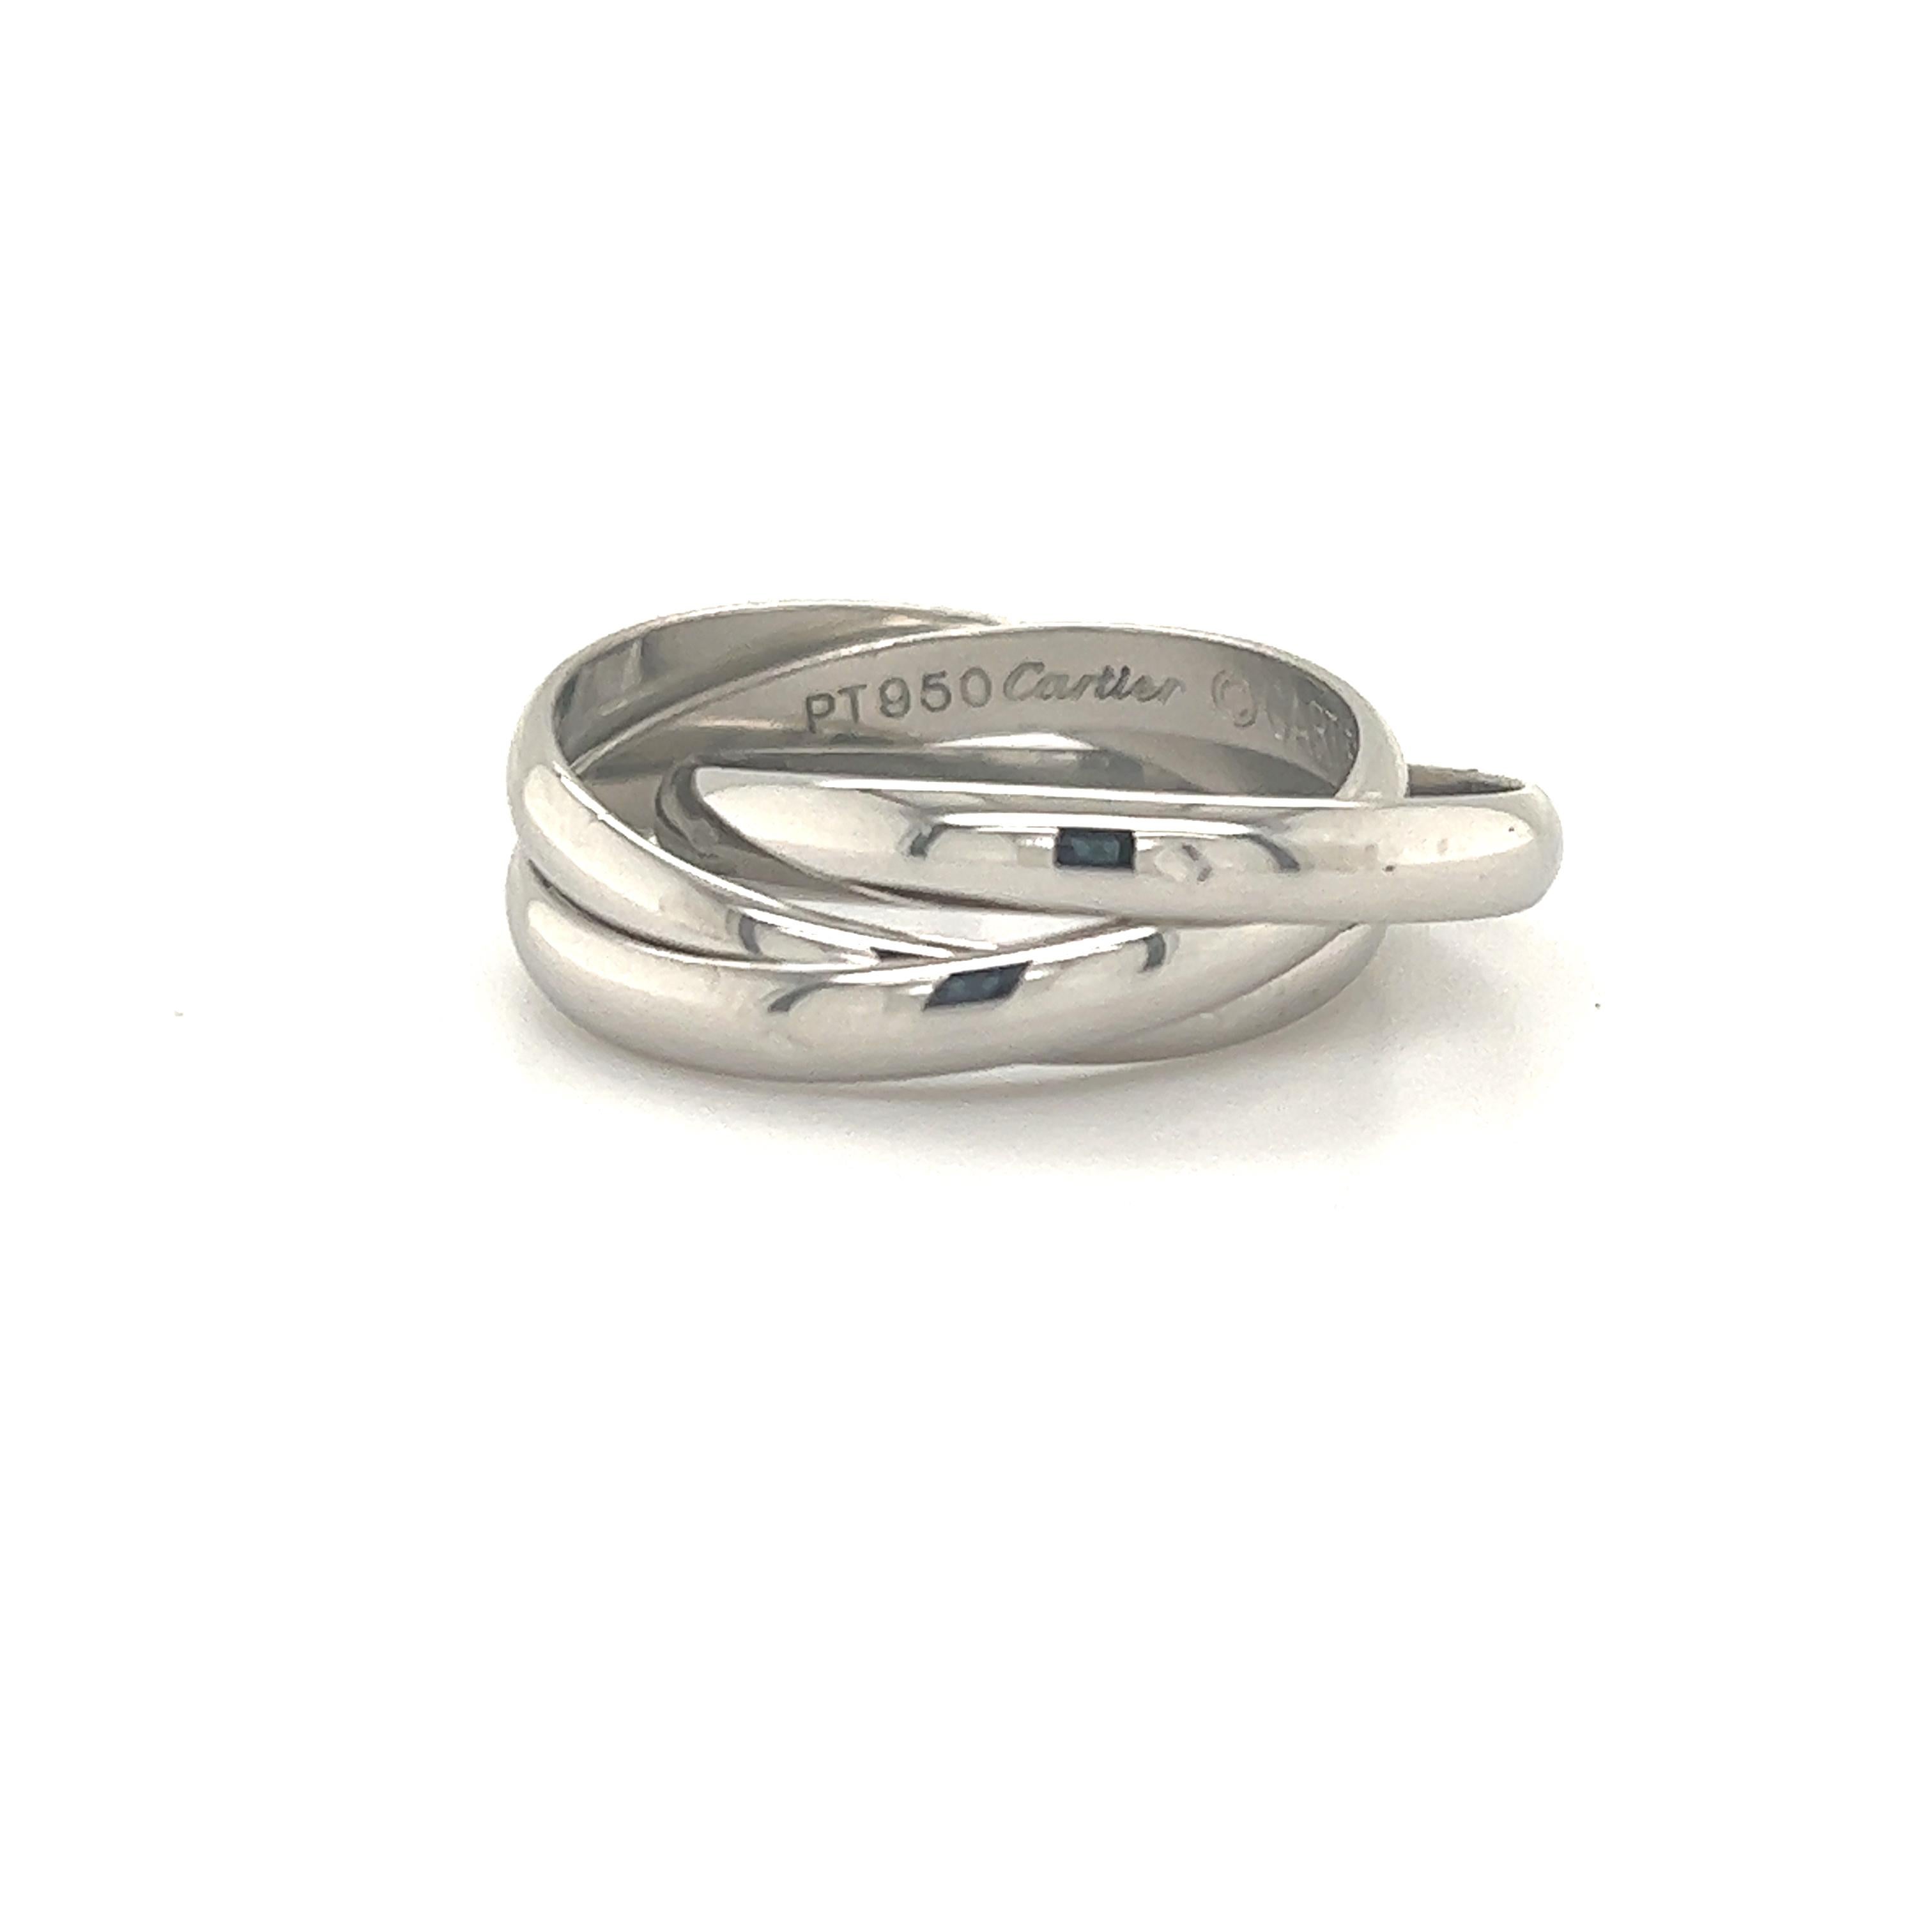    Timeless Cartier ring crafted in platinum. The ring is known as the trinity design as three single bands are interlocked creating a stacked unforgettable look when worn.  This ring in platinum is extremely rare as most designs of this ring are